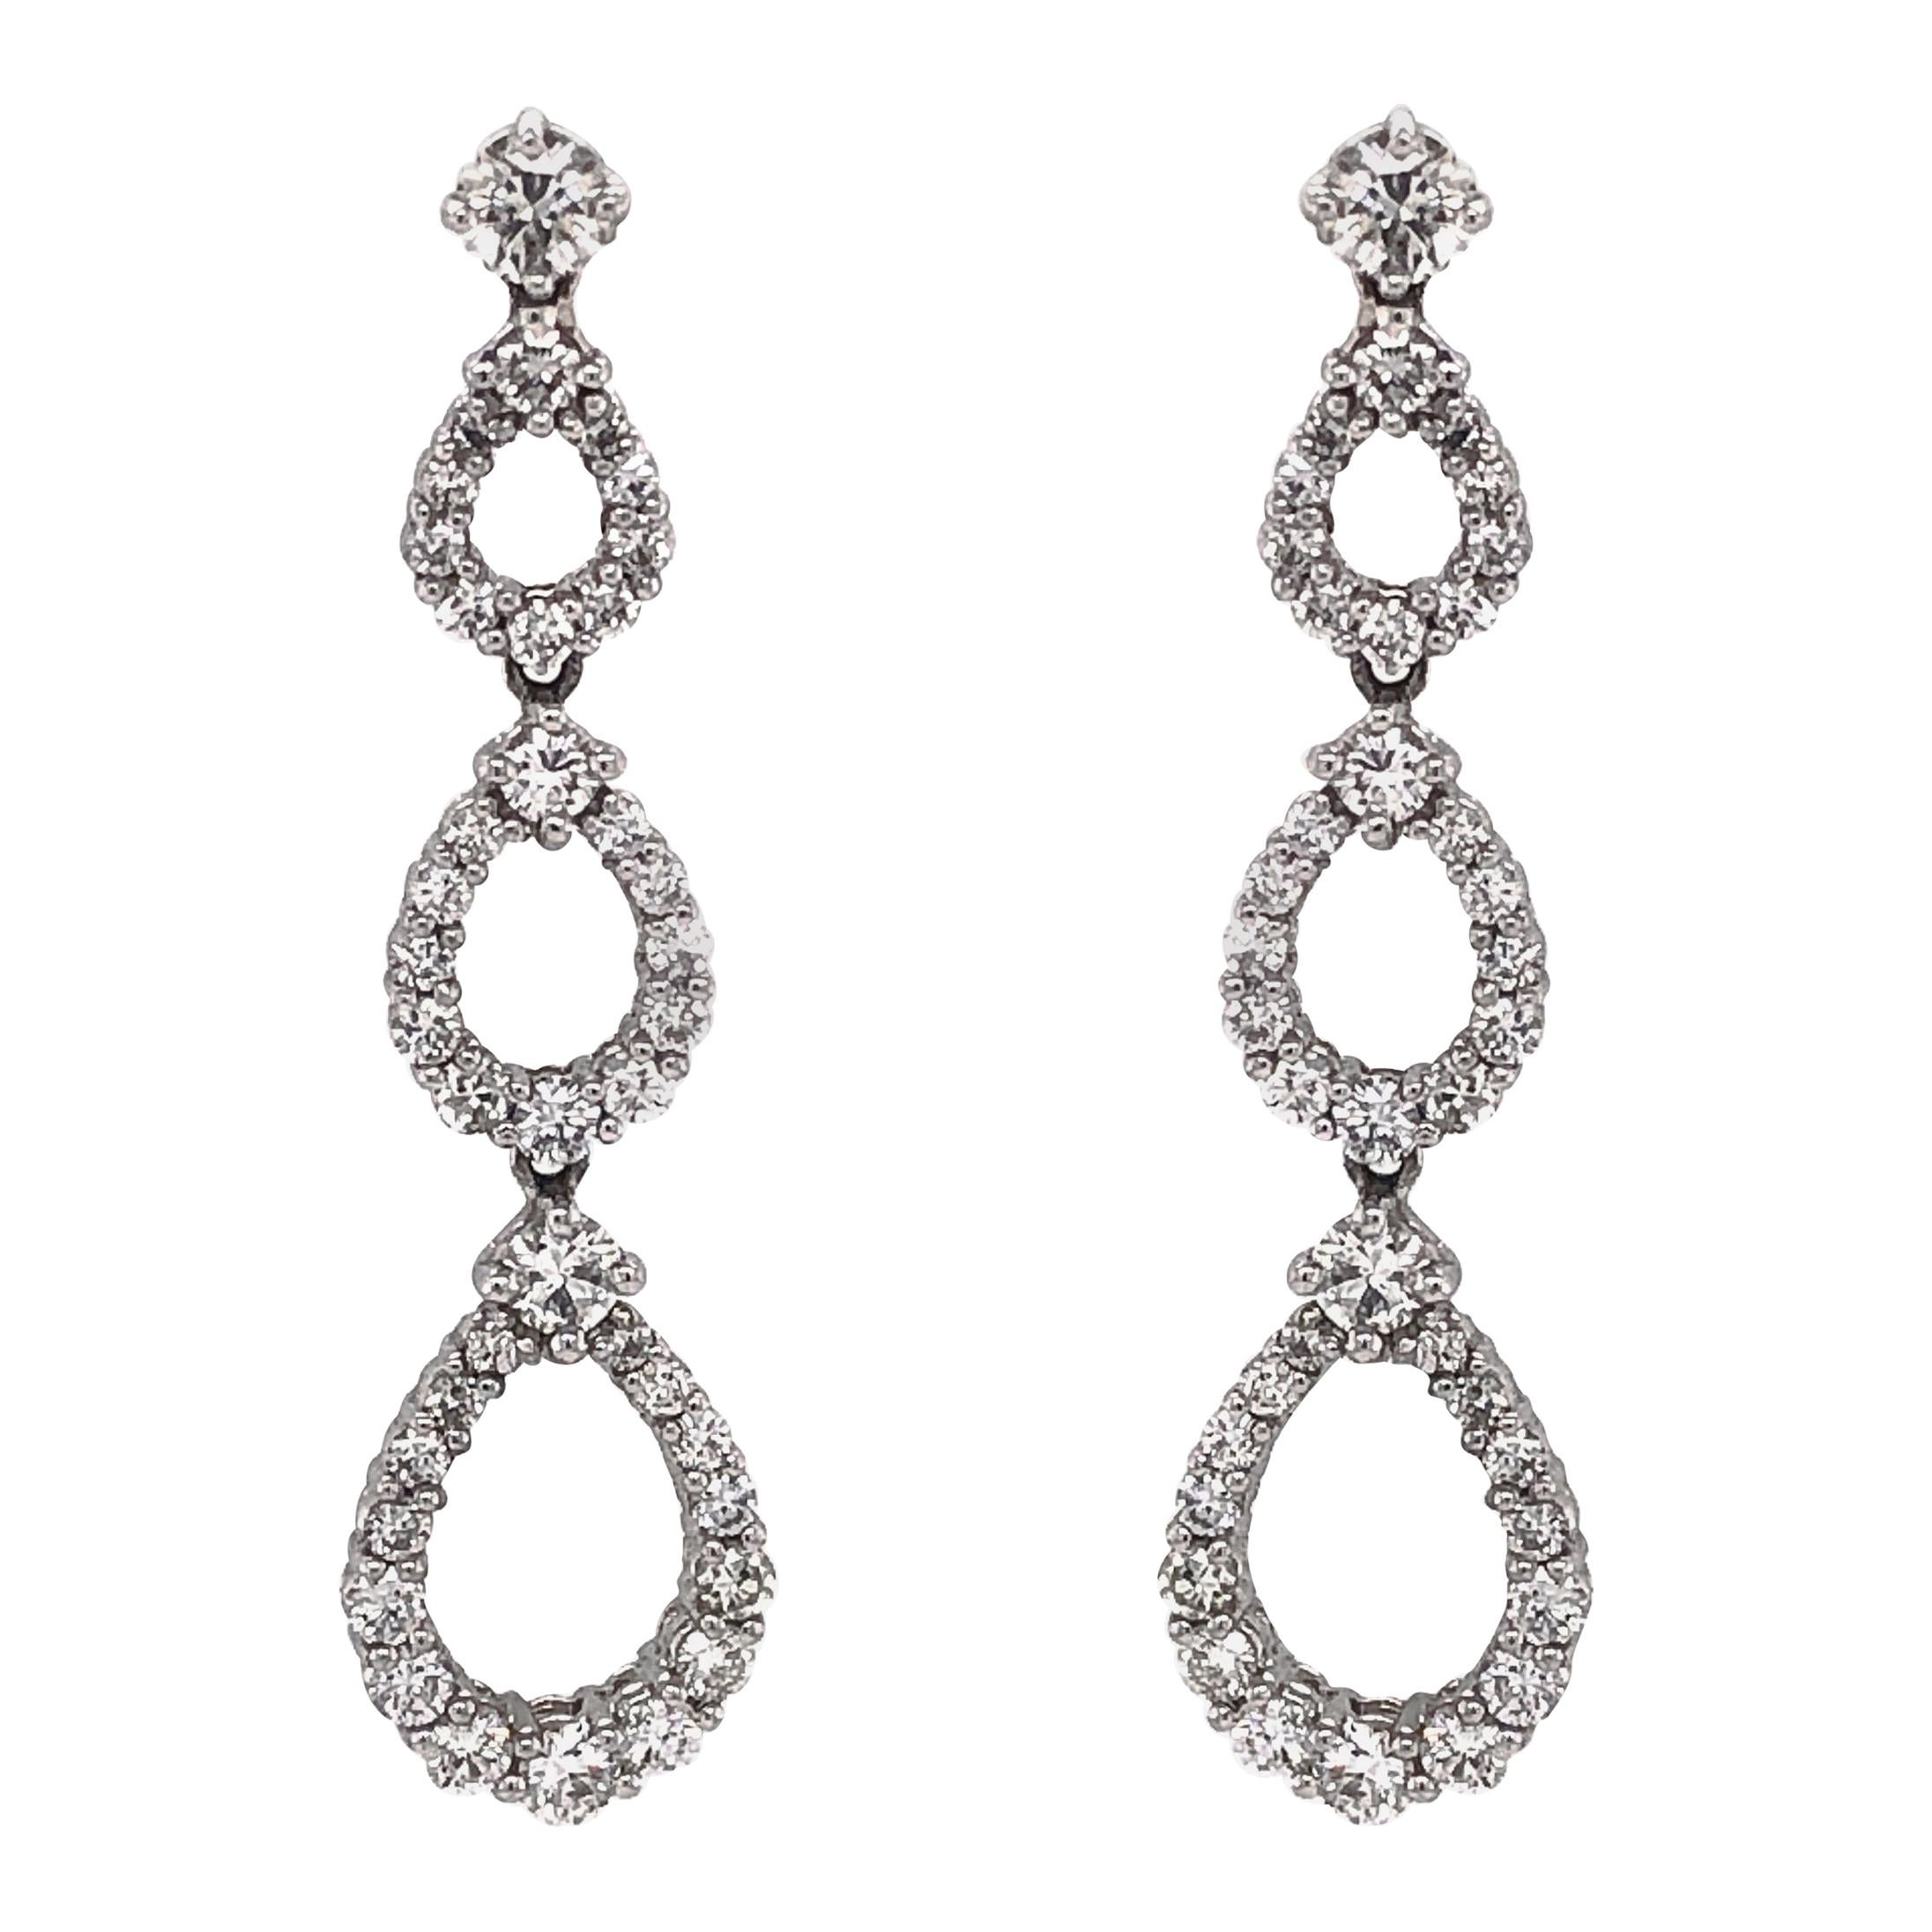 Pear Shapes Round Cut White Diamonds 4.53 Carat Dangling Platinum Earrings For Sale